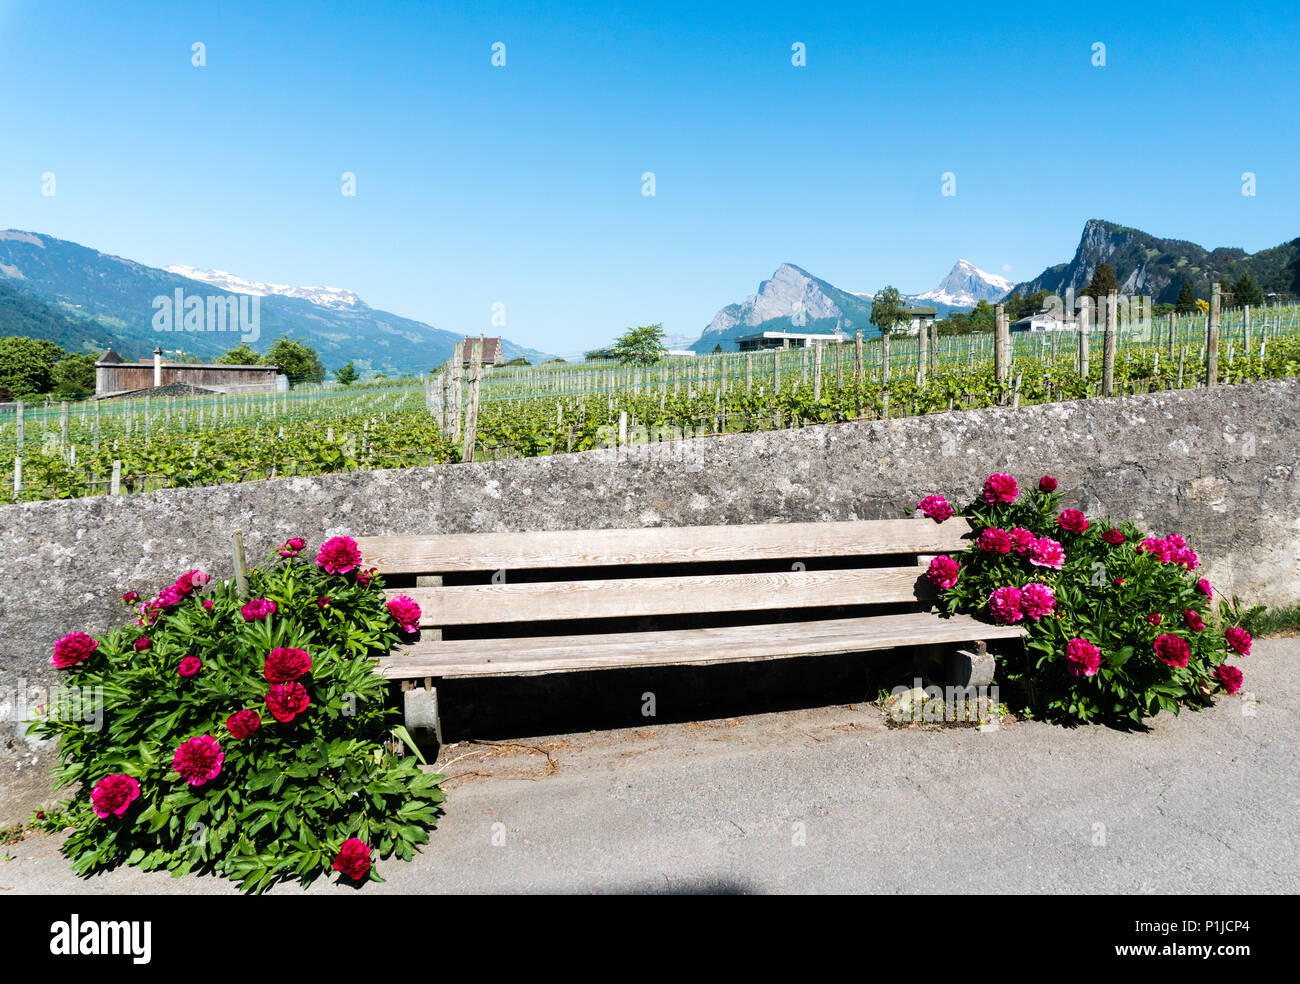 old rustic wooden bench encased by beautiful red blossoming flowers against a rock wall encasing a vineyard in a mountain valley on a beautiful sprind Stock Photo